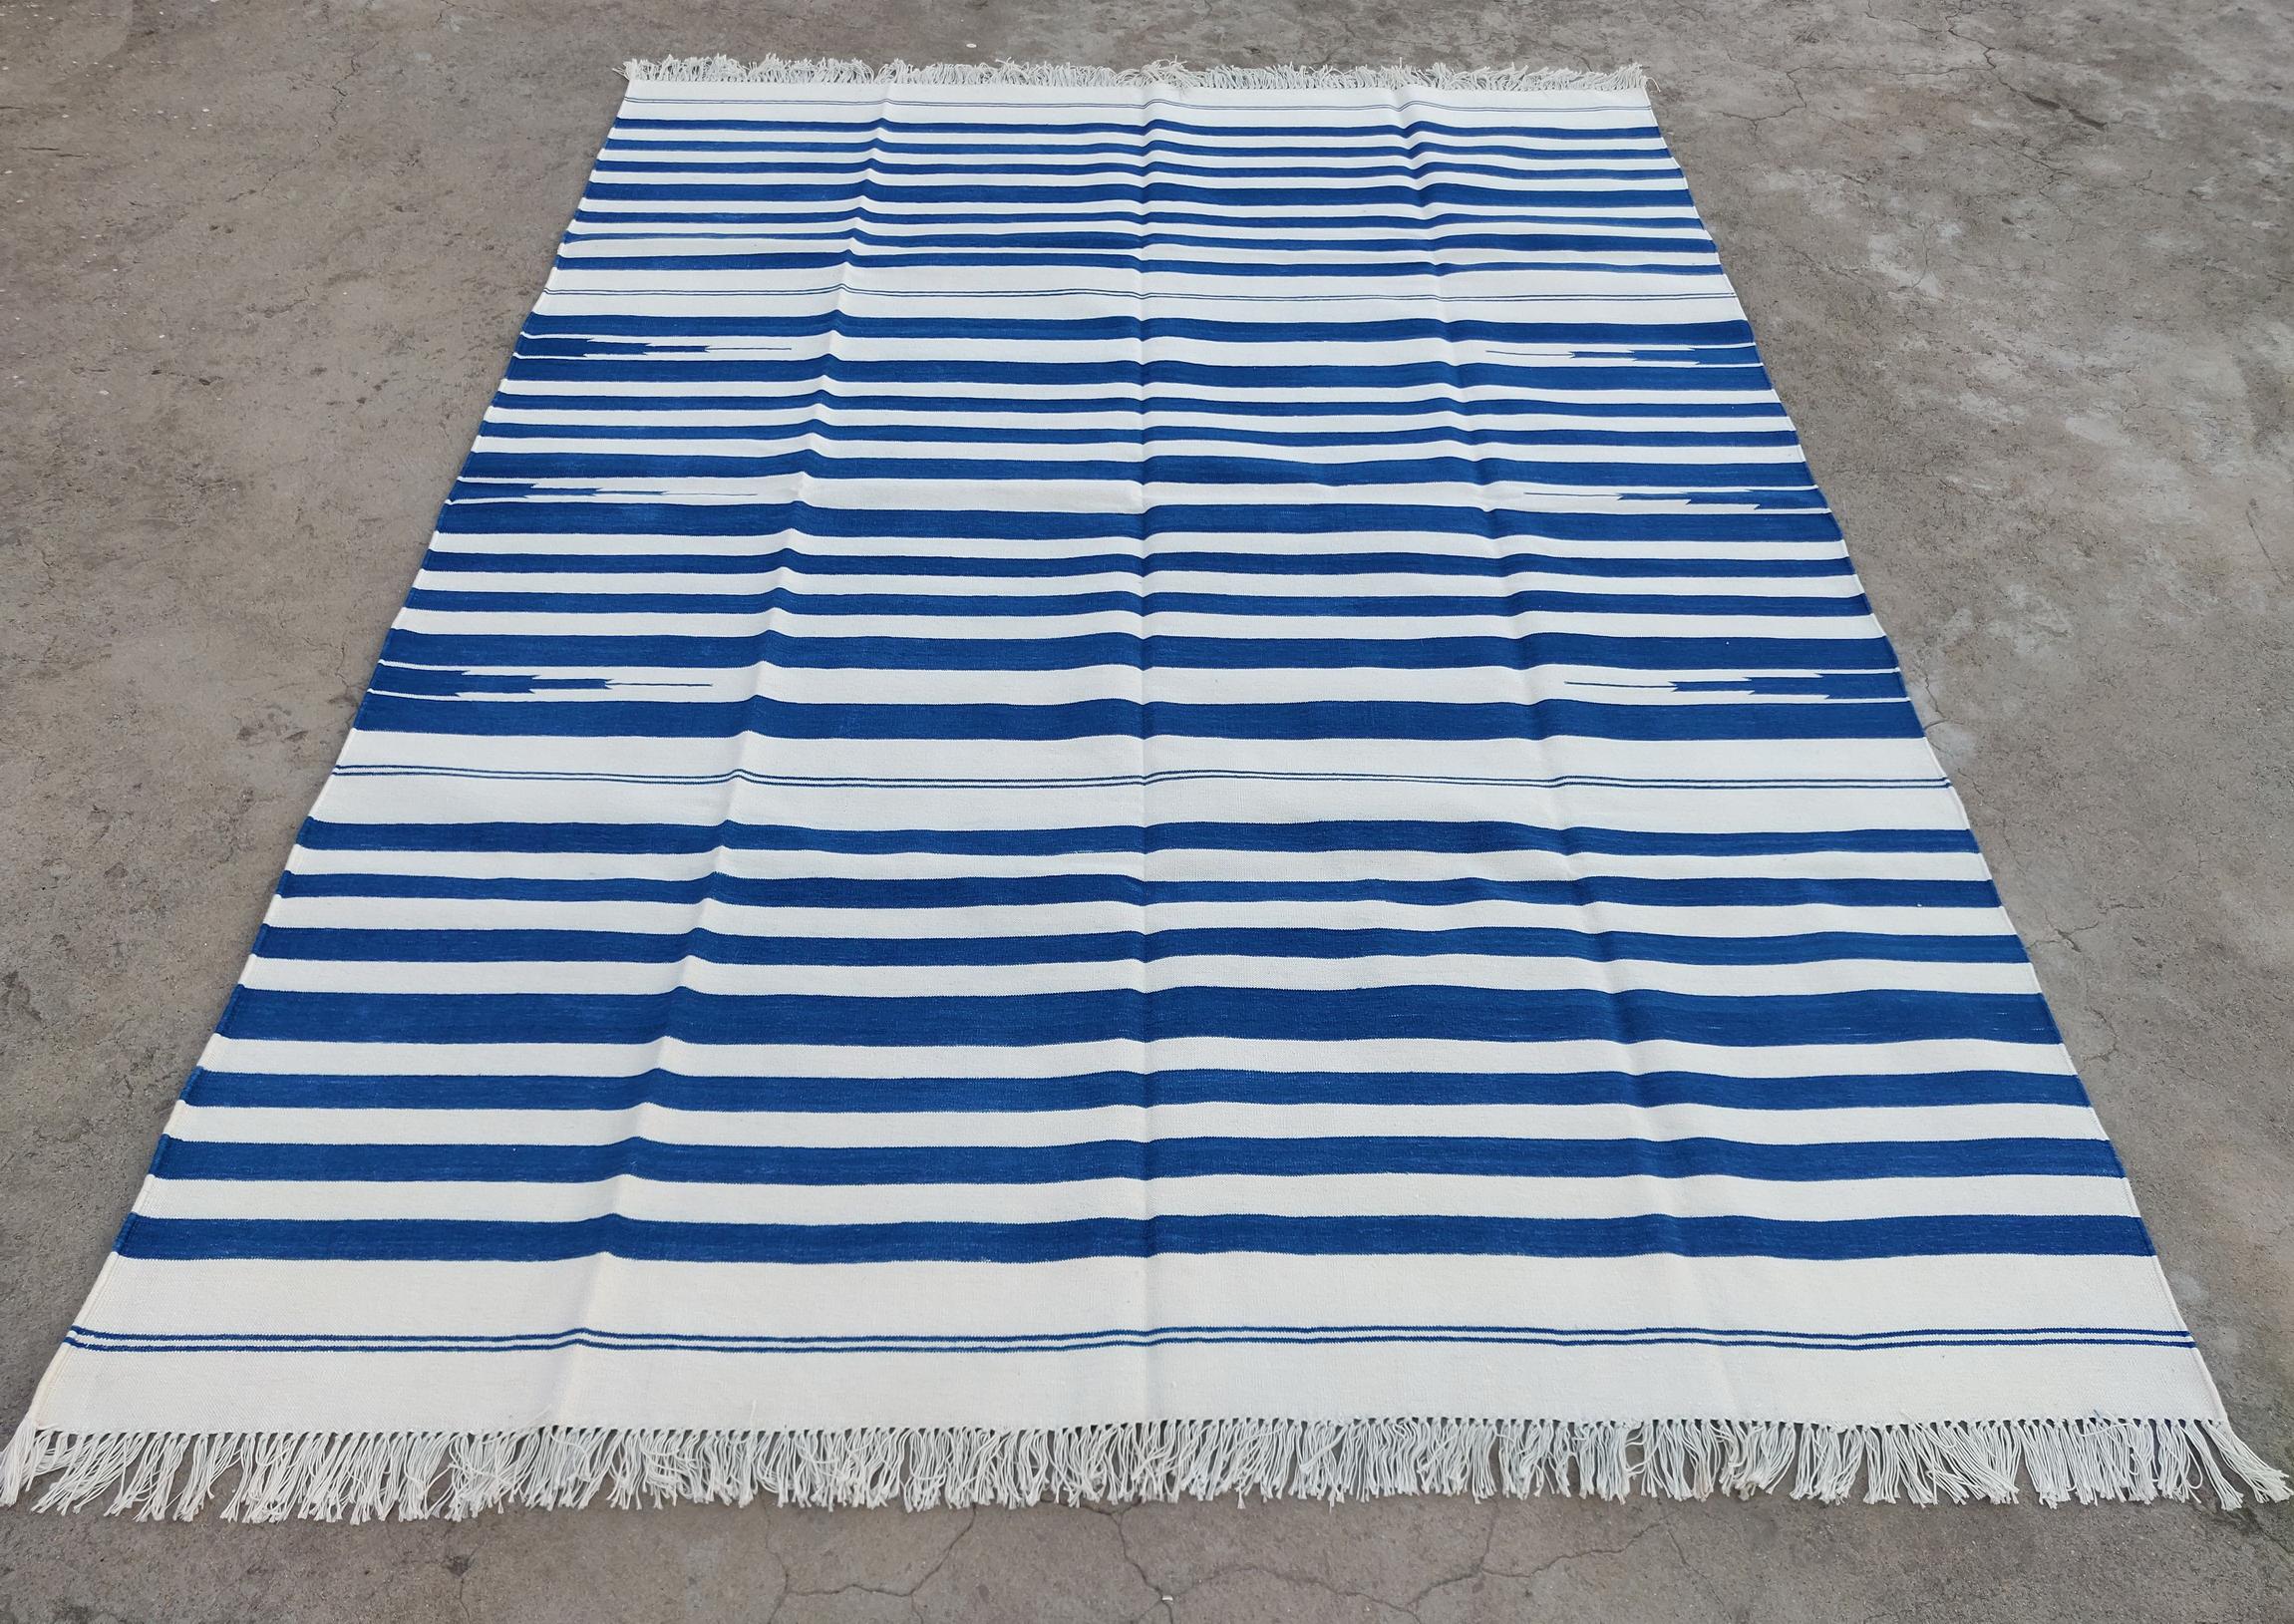 Contemporary Handmade Cotton Area Flat Weave Rug, 6x8 Blue And White Striped Indian Dhurrie For Sale